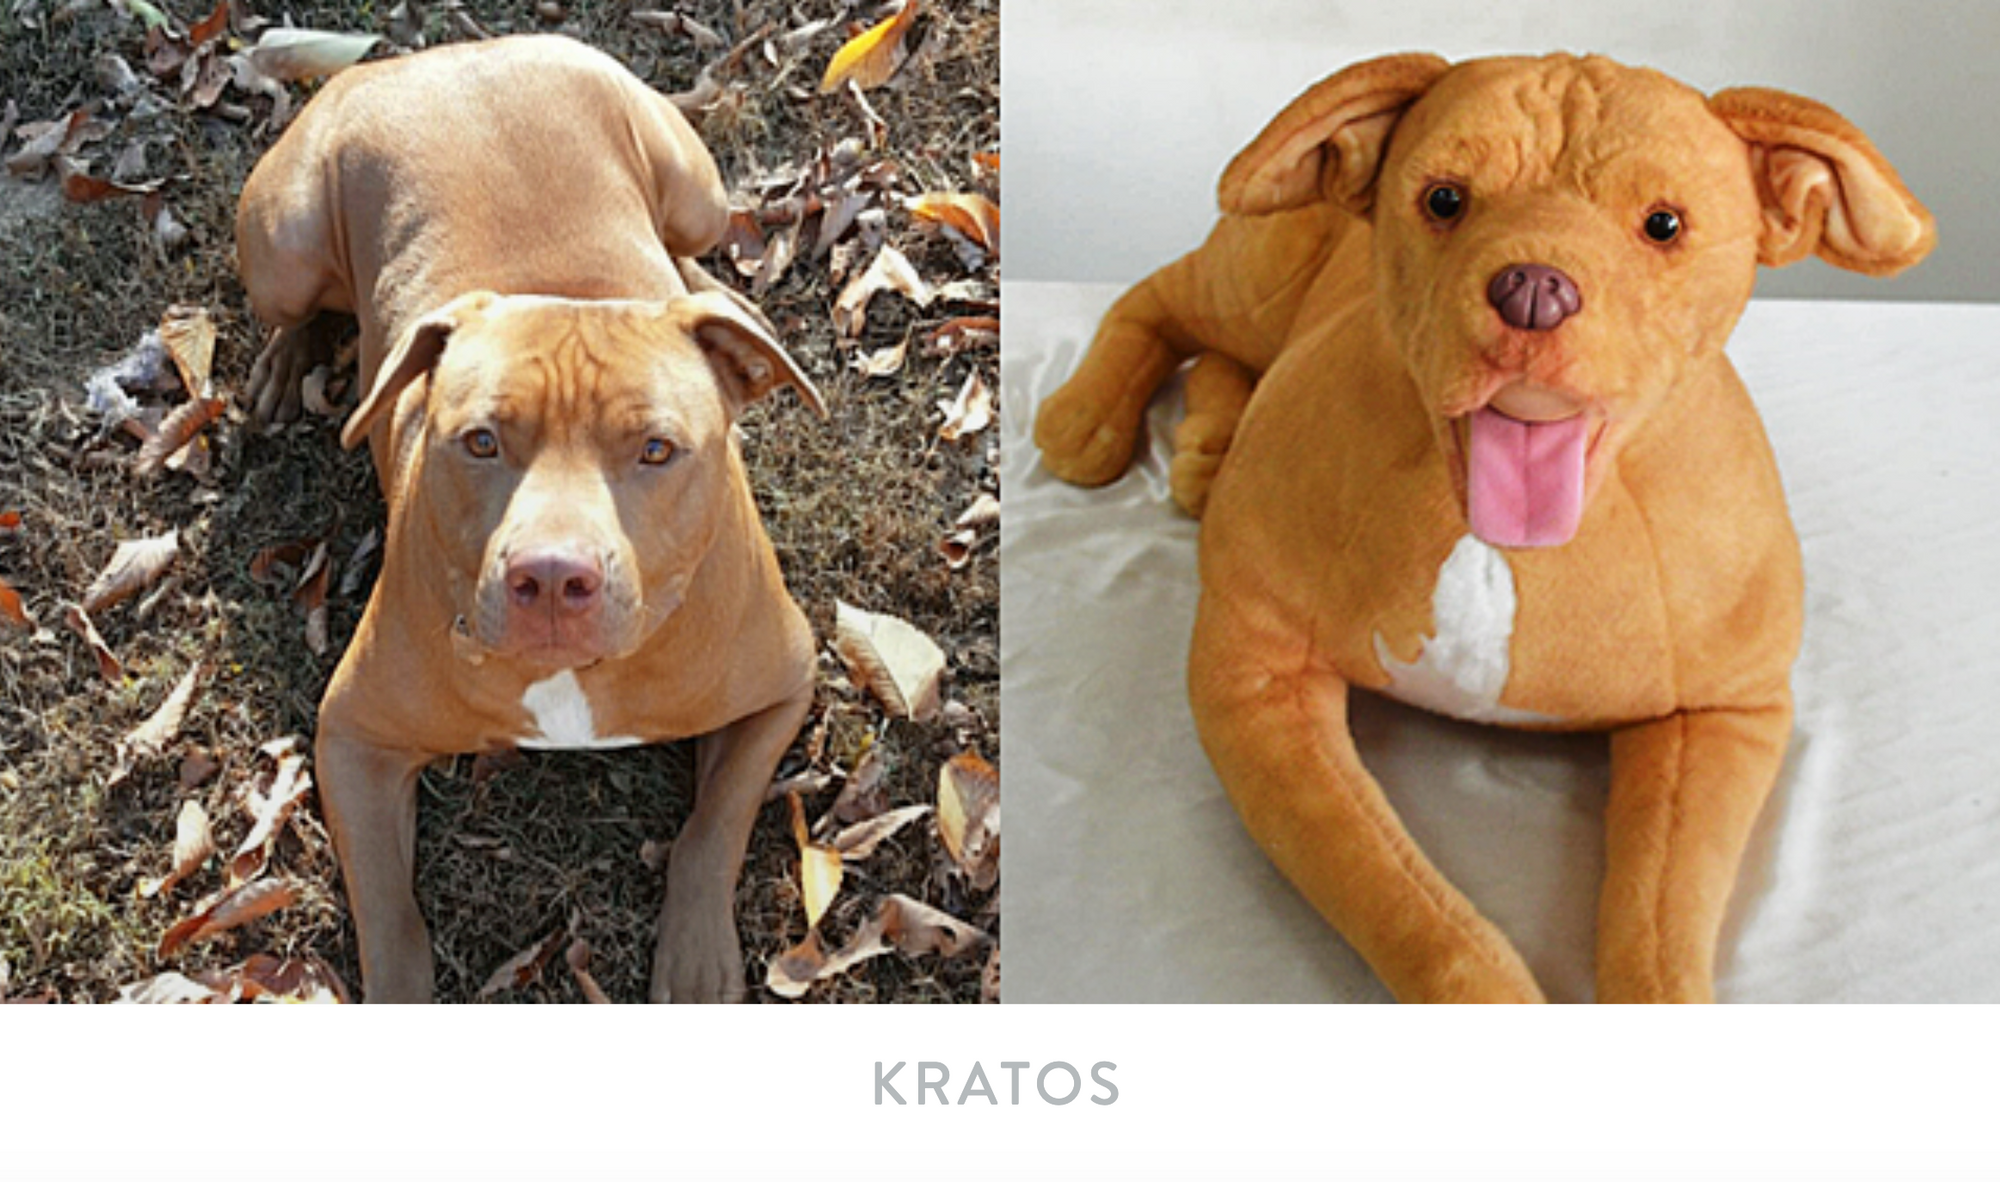 Side by side of dog Kratos and their Cuddle Clone